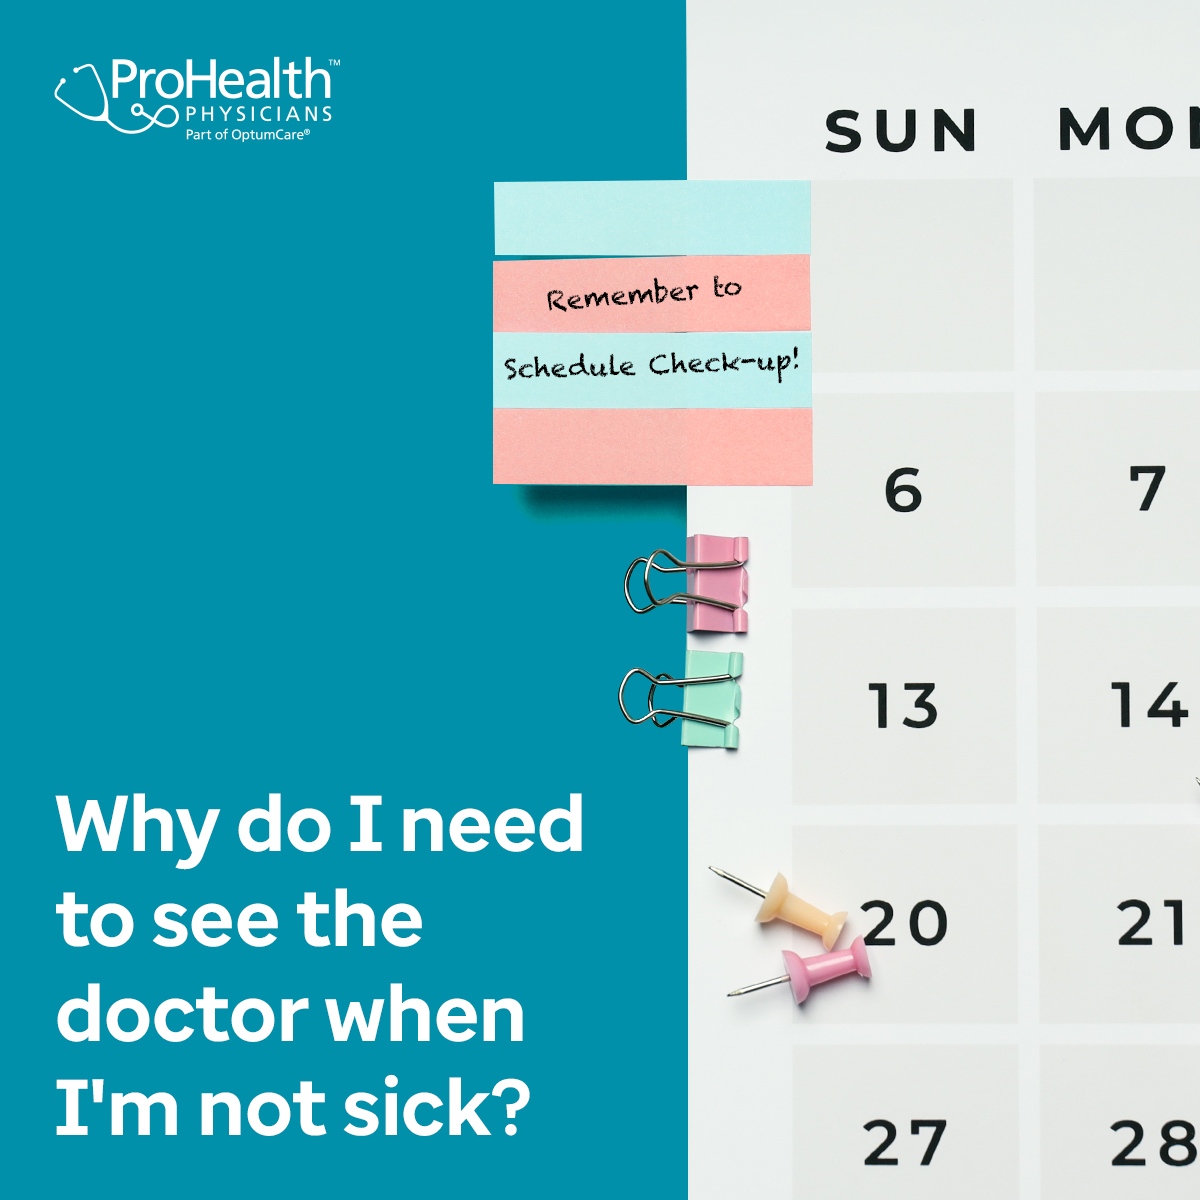 What's our approach to care? We're here for you when you're sick. We also want to see you when you're well. Our care teams encourage preventive care. This helps us find or prevent illnesses before they become more serious. Remember to schedule your annual check-up.